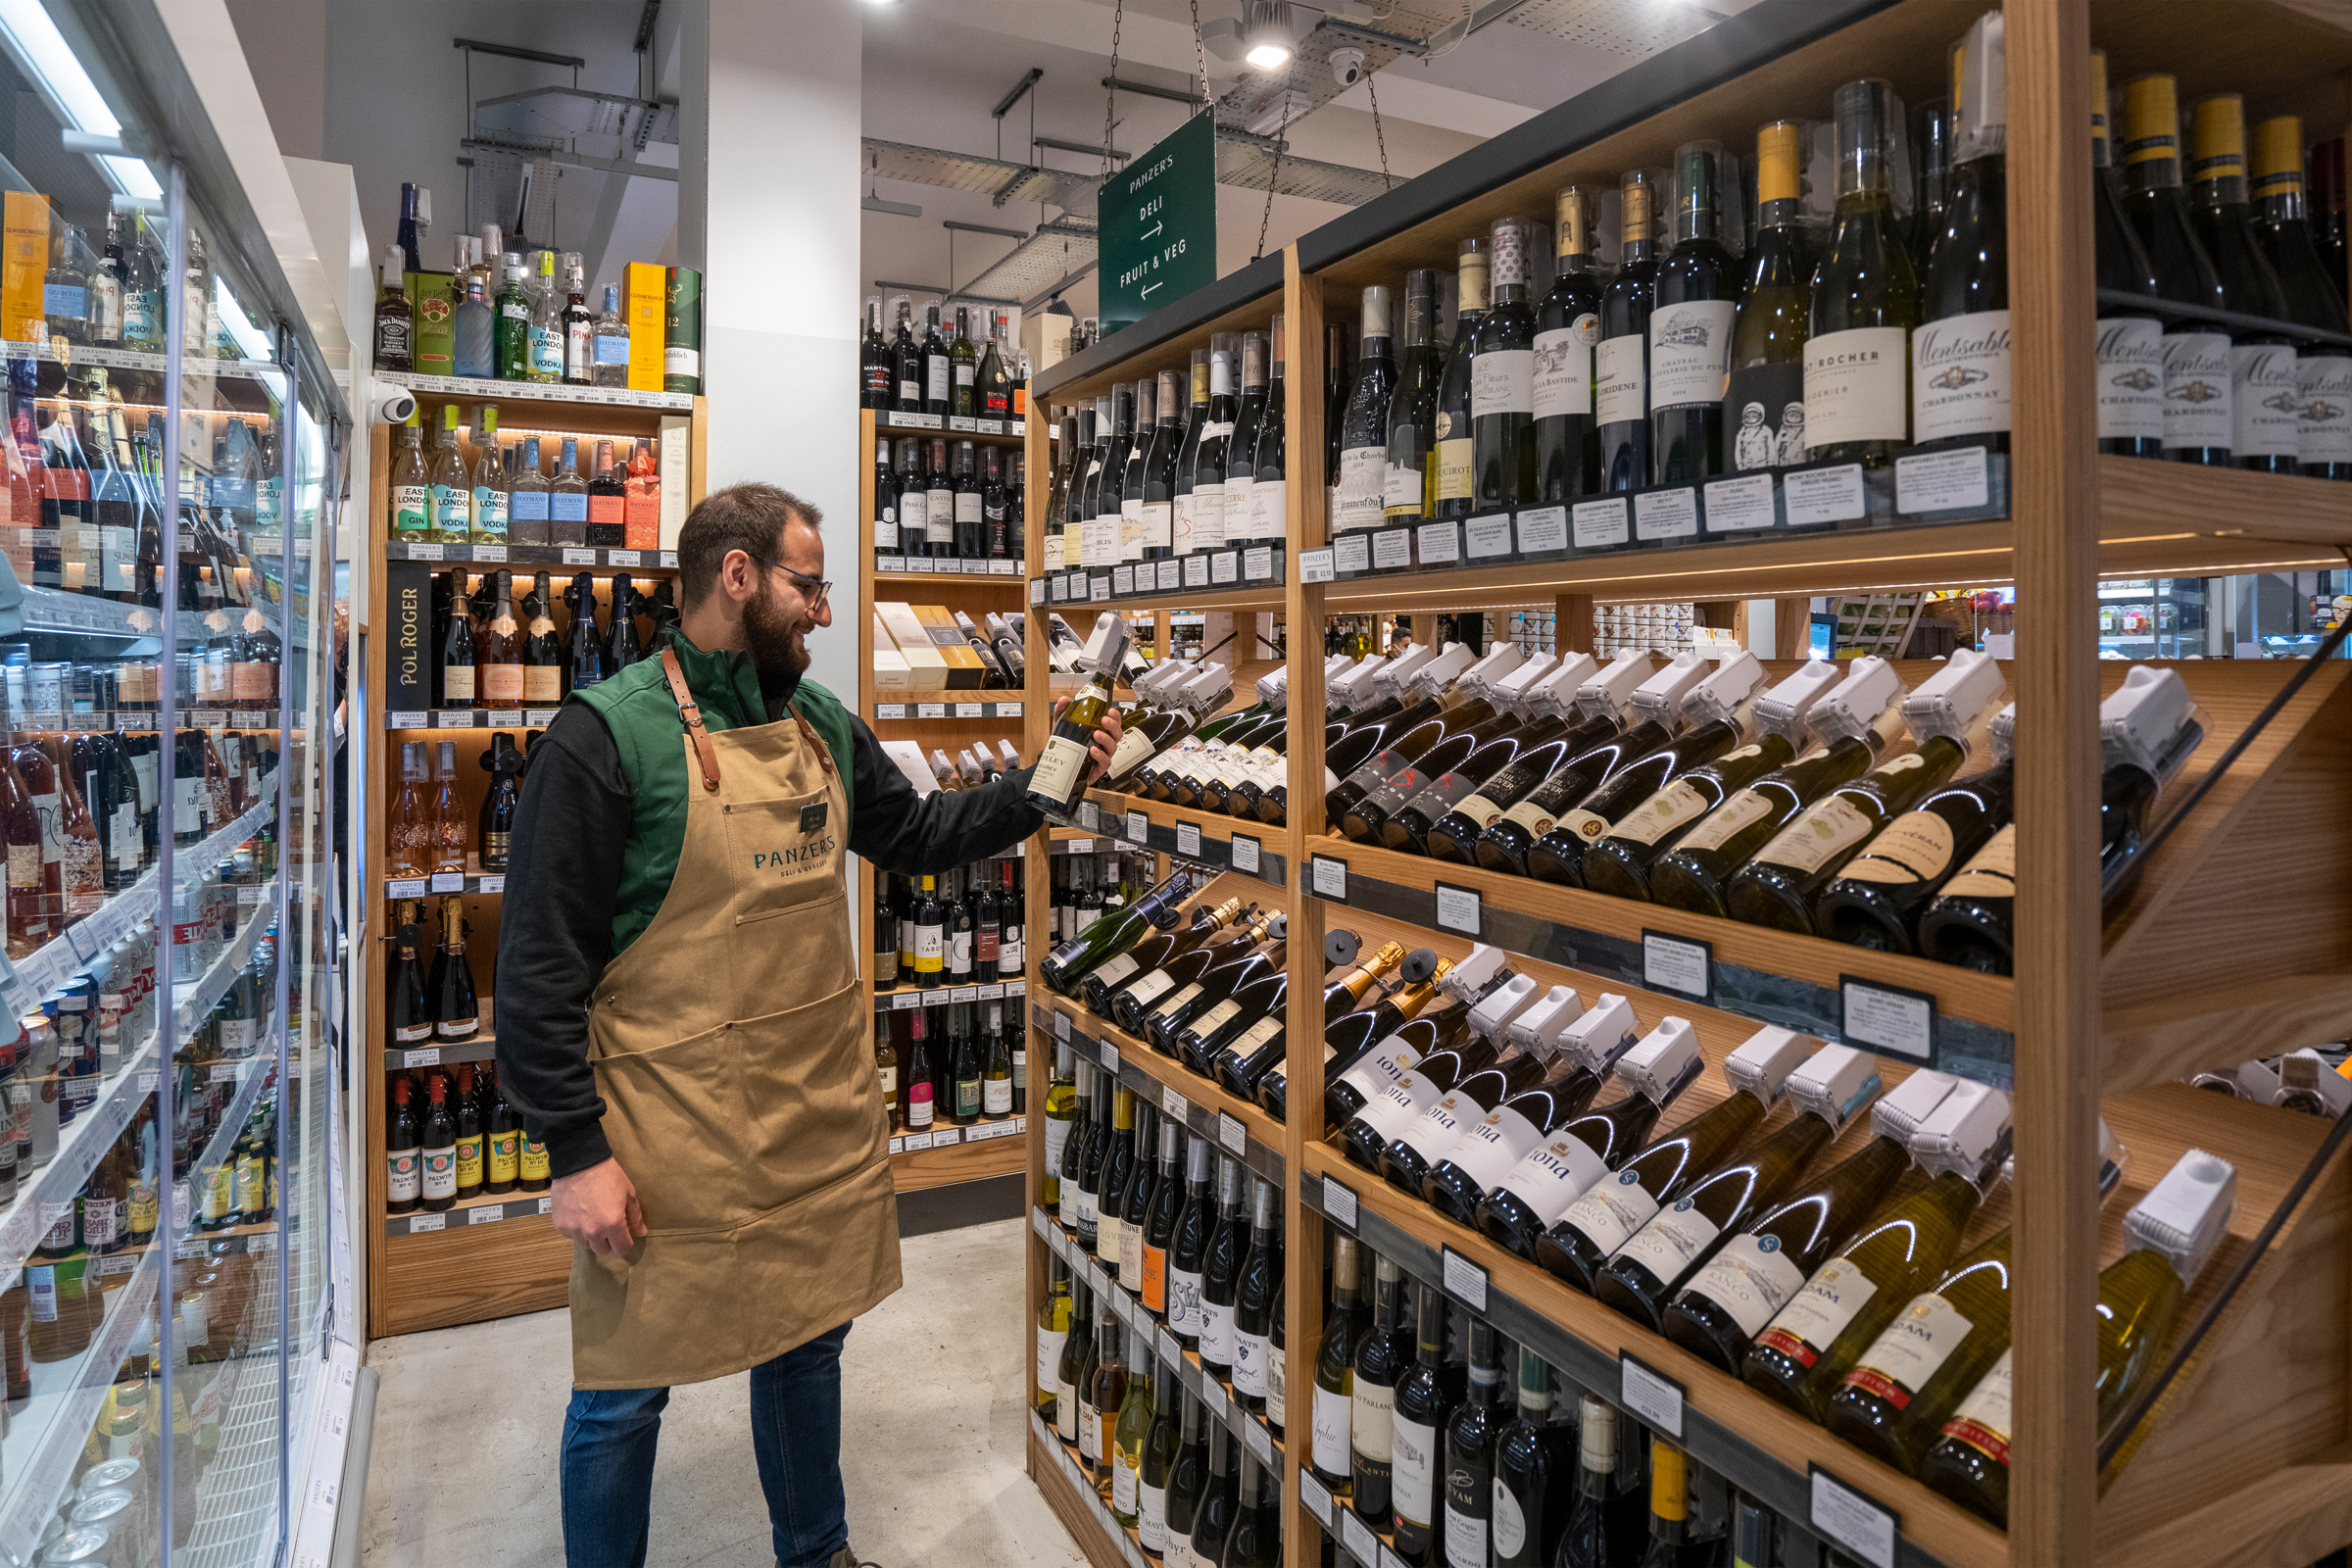 A member of staff stands in front of Panzer's deli wine ranks